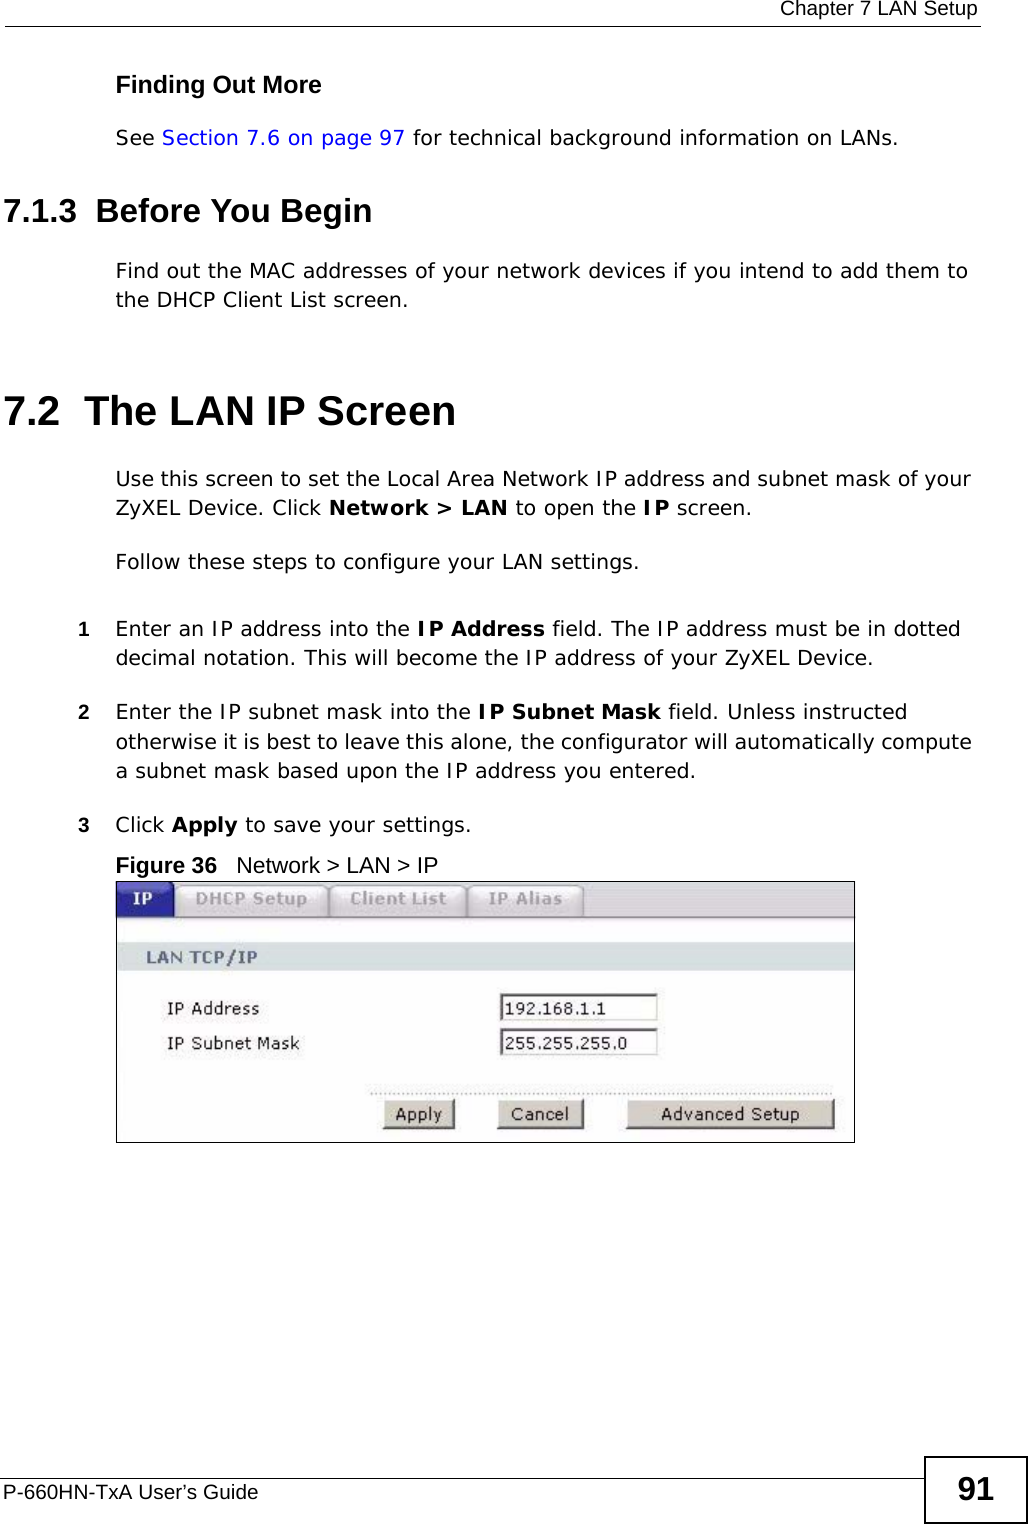  Chapter 7 LAN SetupP-660HN-TxA User’s Guide 91Finding Out MoreSee Section 7.6 on page 97 for technical background information on LANs.7.1.3  Before You BeginFind out the MAC addresses of your network devices if you intend to add them to the DHCP Client List screen.7.2  The LAN IP ScreenUse this screen to set the Local Area Network IP address and subnet mask of your ZyXEL Device. Click Network &gt; LAN to open the IP screen. Follow these steps to configure your LAN settings.1Enter an IP address into the IP Address field. The IP address must be in dotted decimal notation. This will become the IP address of your ZyXEL Device.2Enter the IP subnet mask into the IP Subnet Mask field. Unless instructed otherwise it is best to leave this alone, the configurator will automatically compute a subnet mask based upon the IP address you entered.3Click Apply to save your settings.Figure 36   Network &gt; LAN &gt; IP